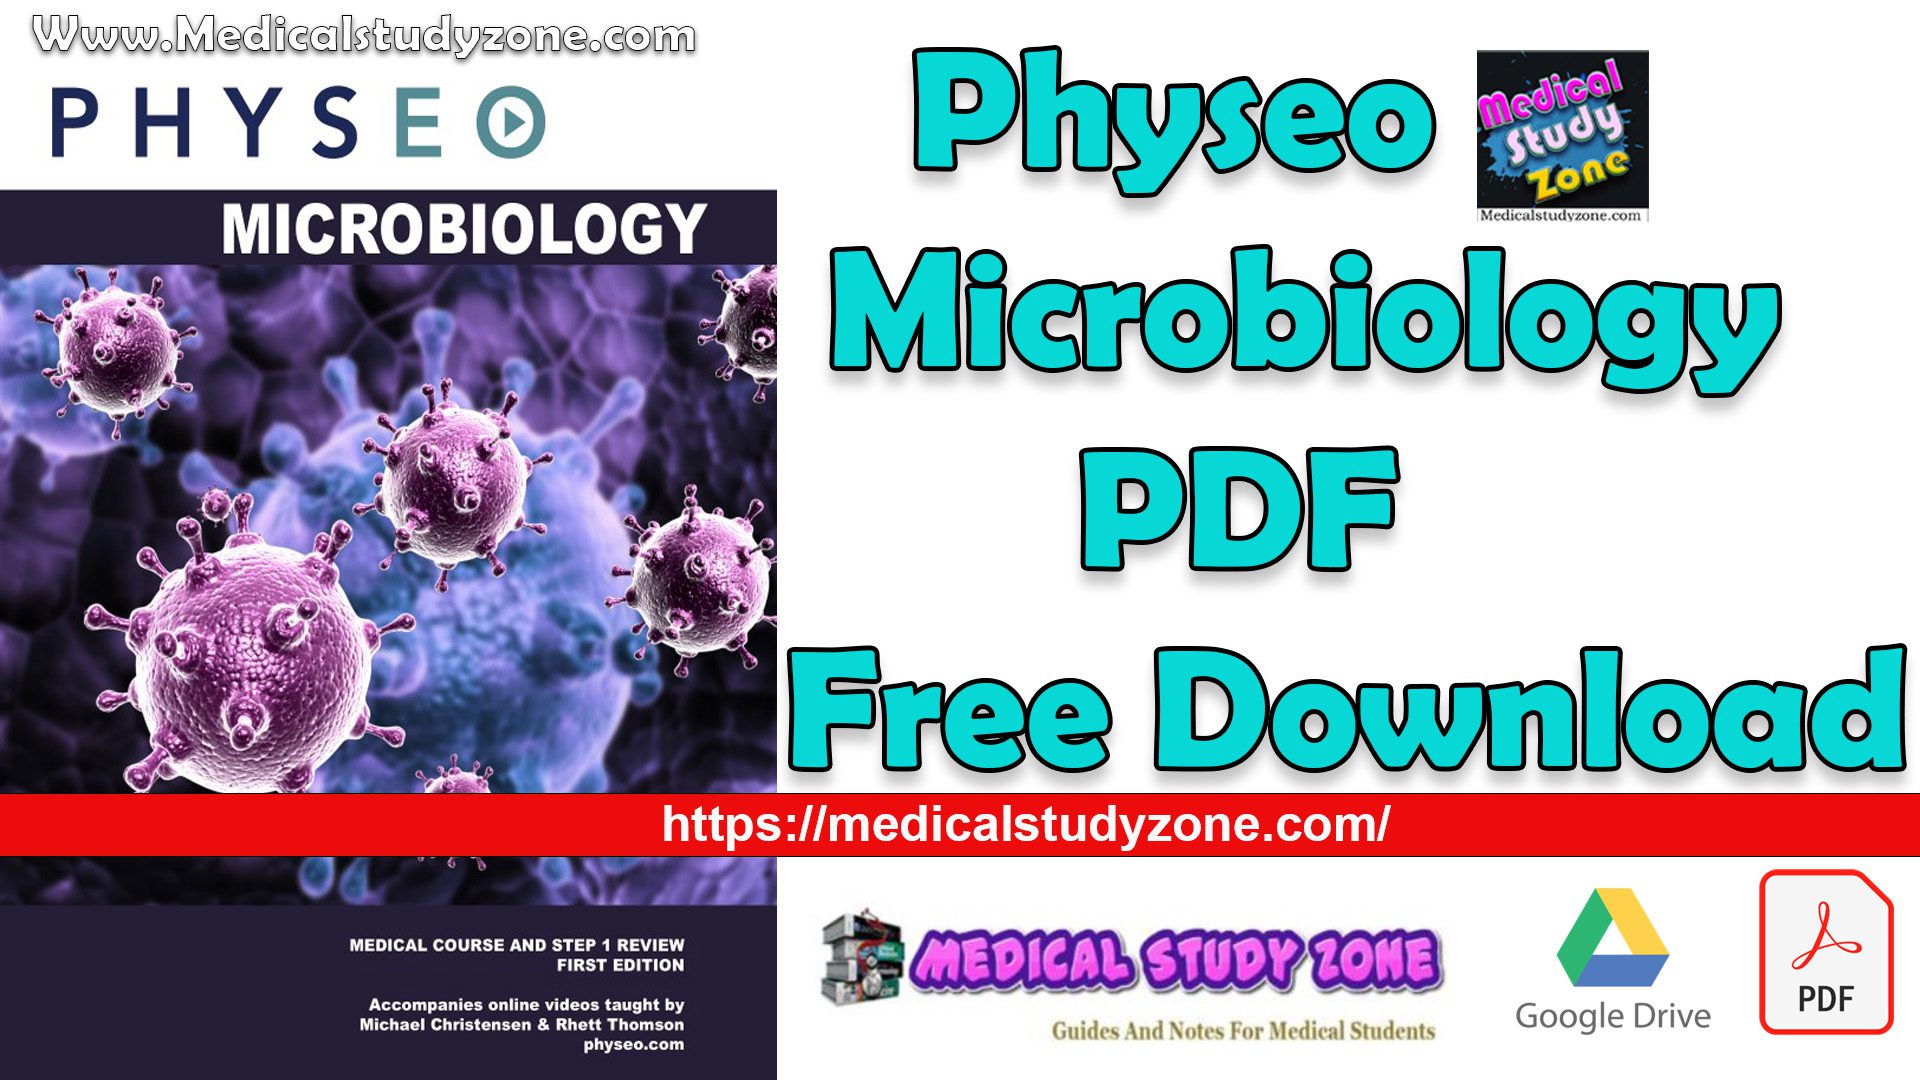 Physeo Microbiology PDF Free Download